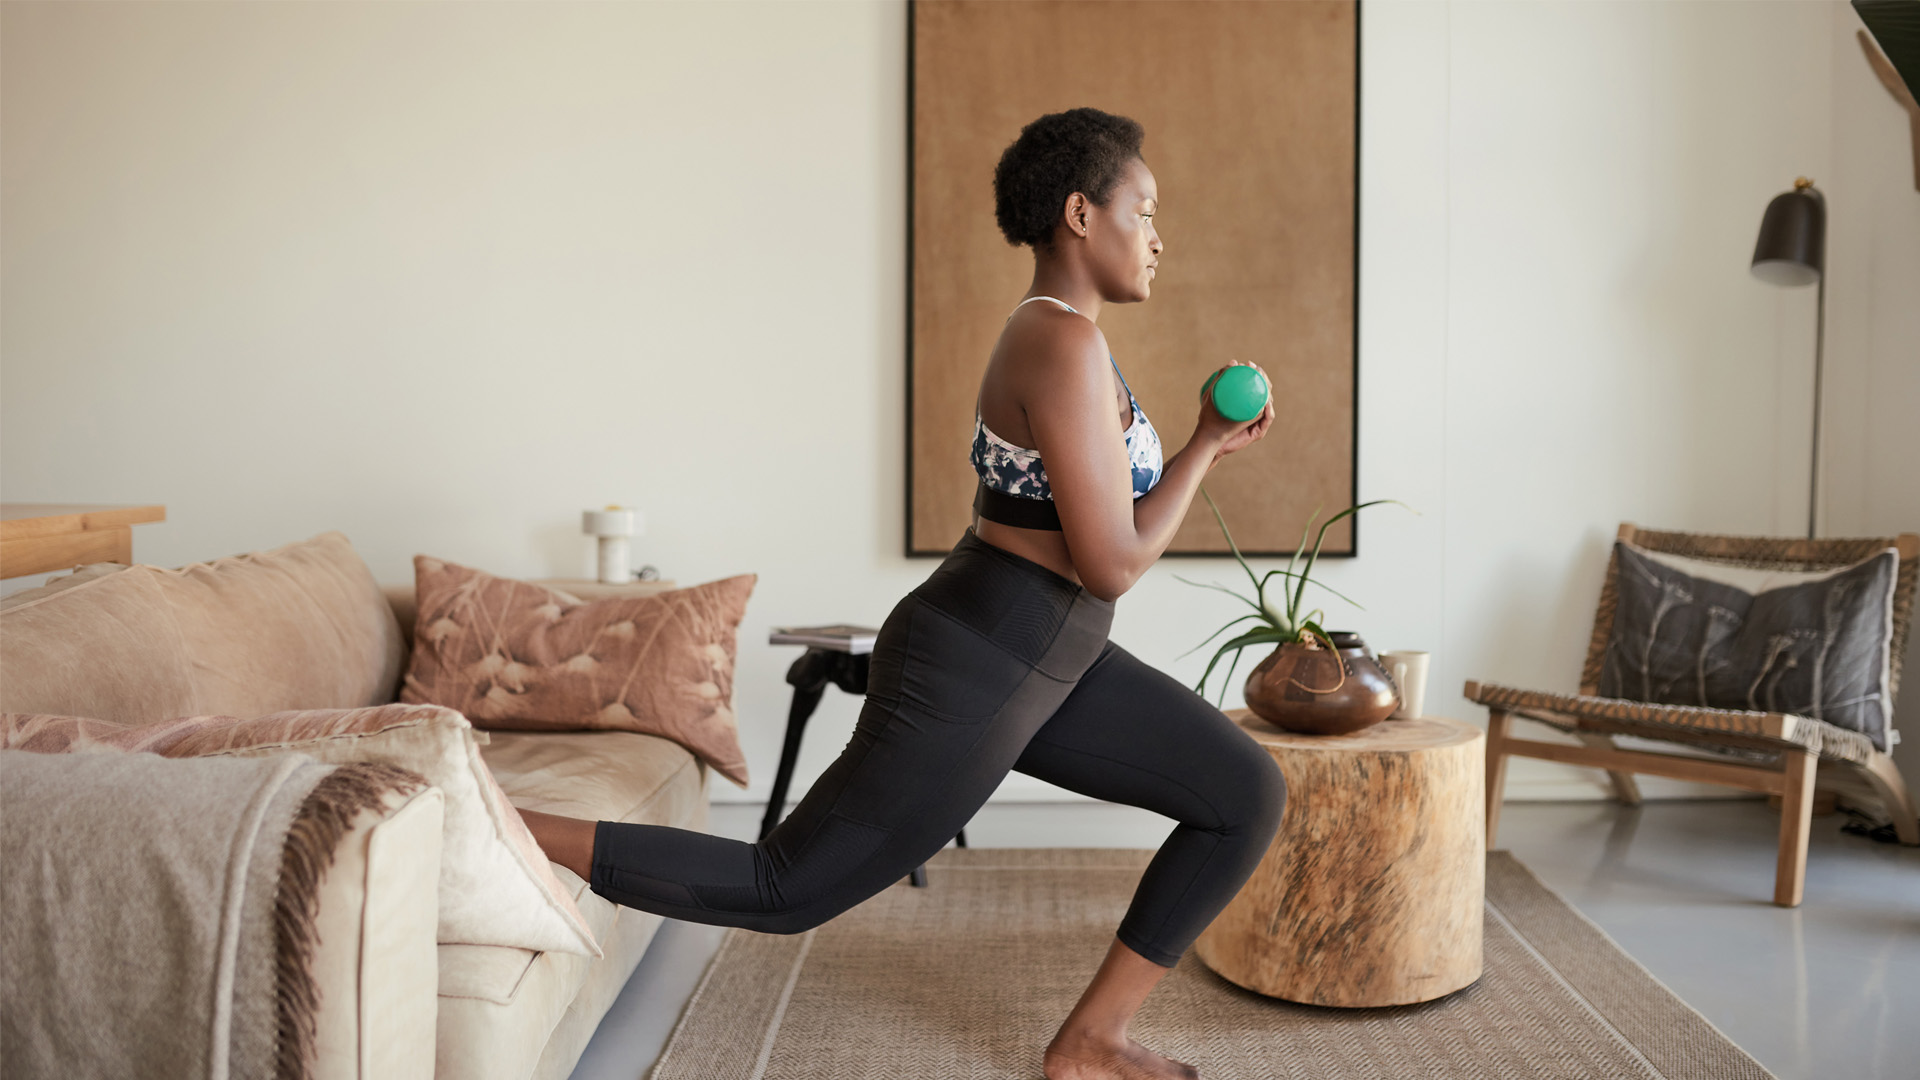 Image of a woman exercising with weights at home